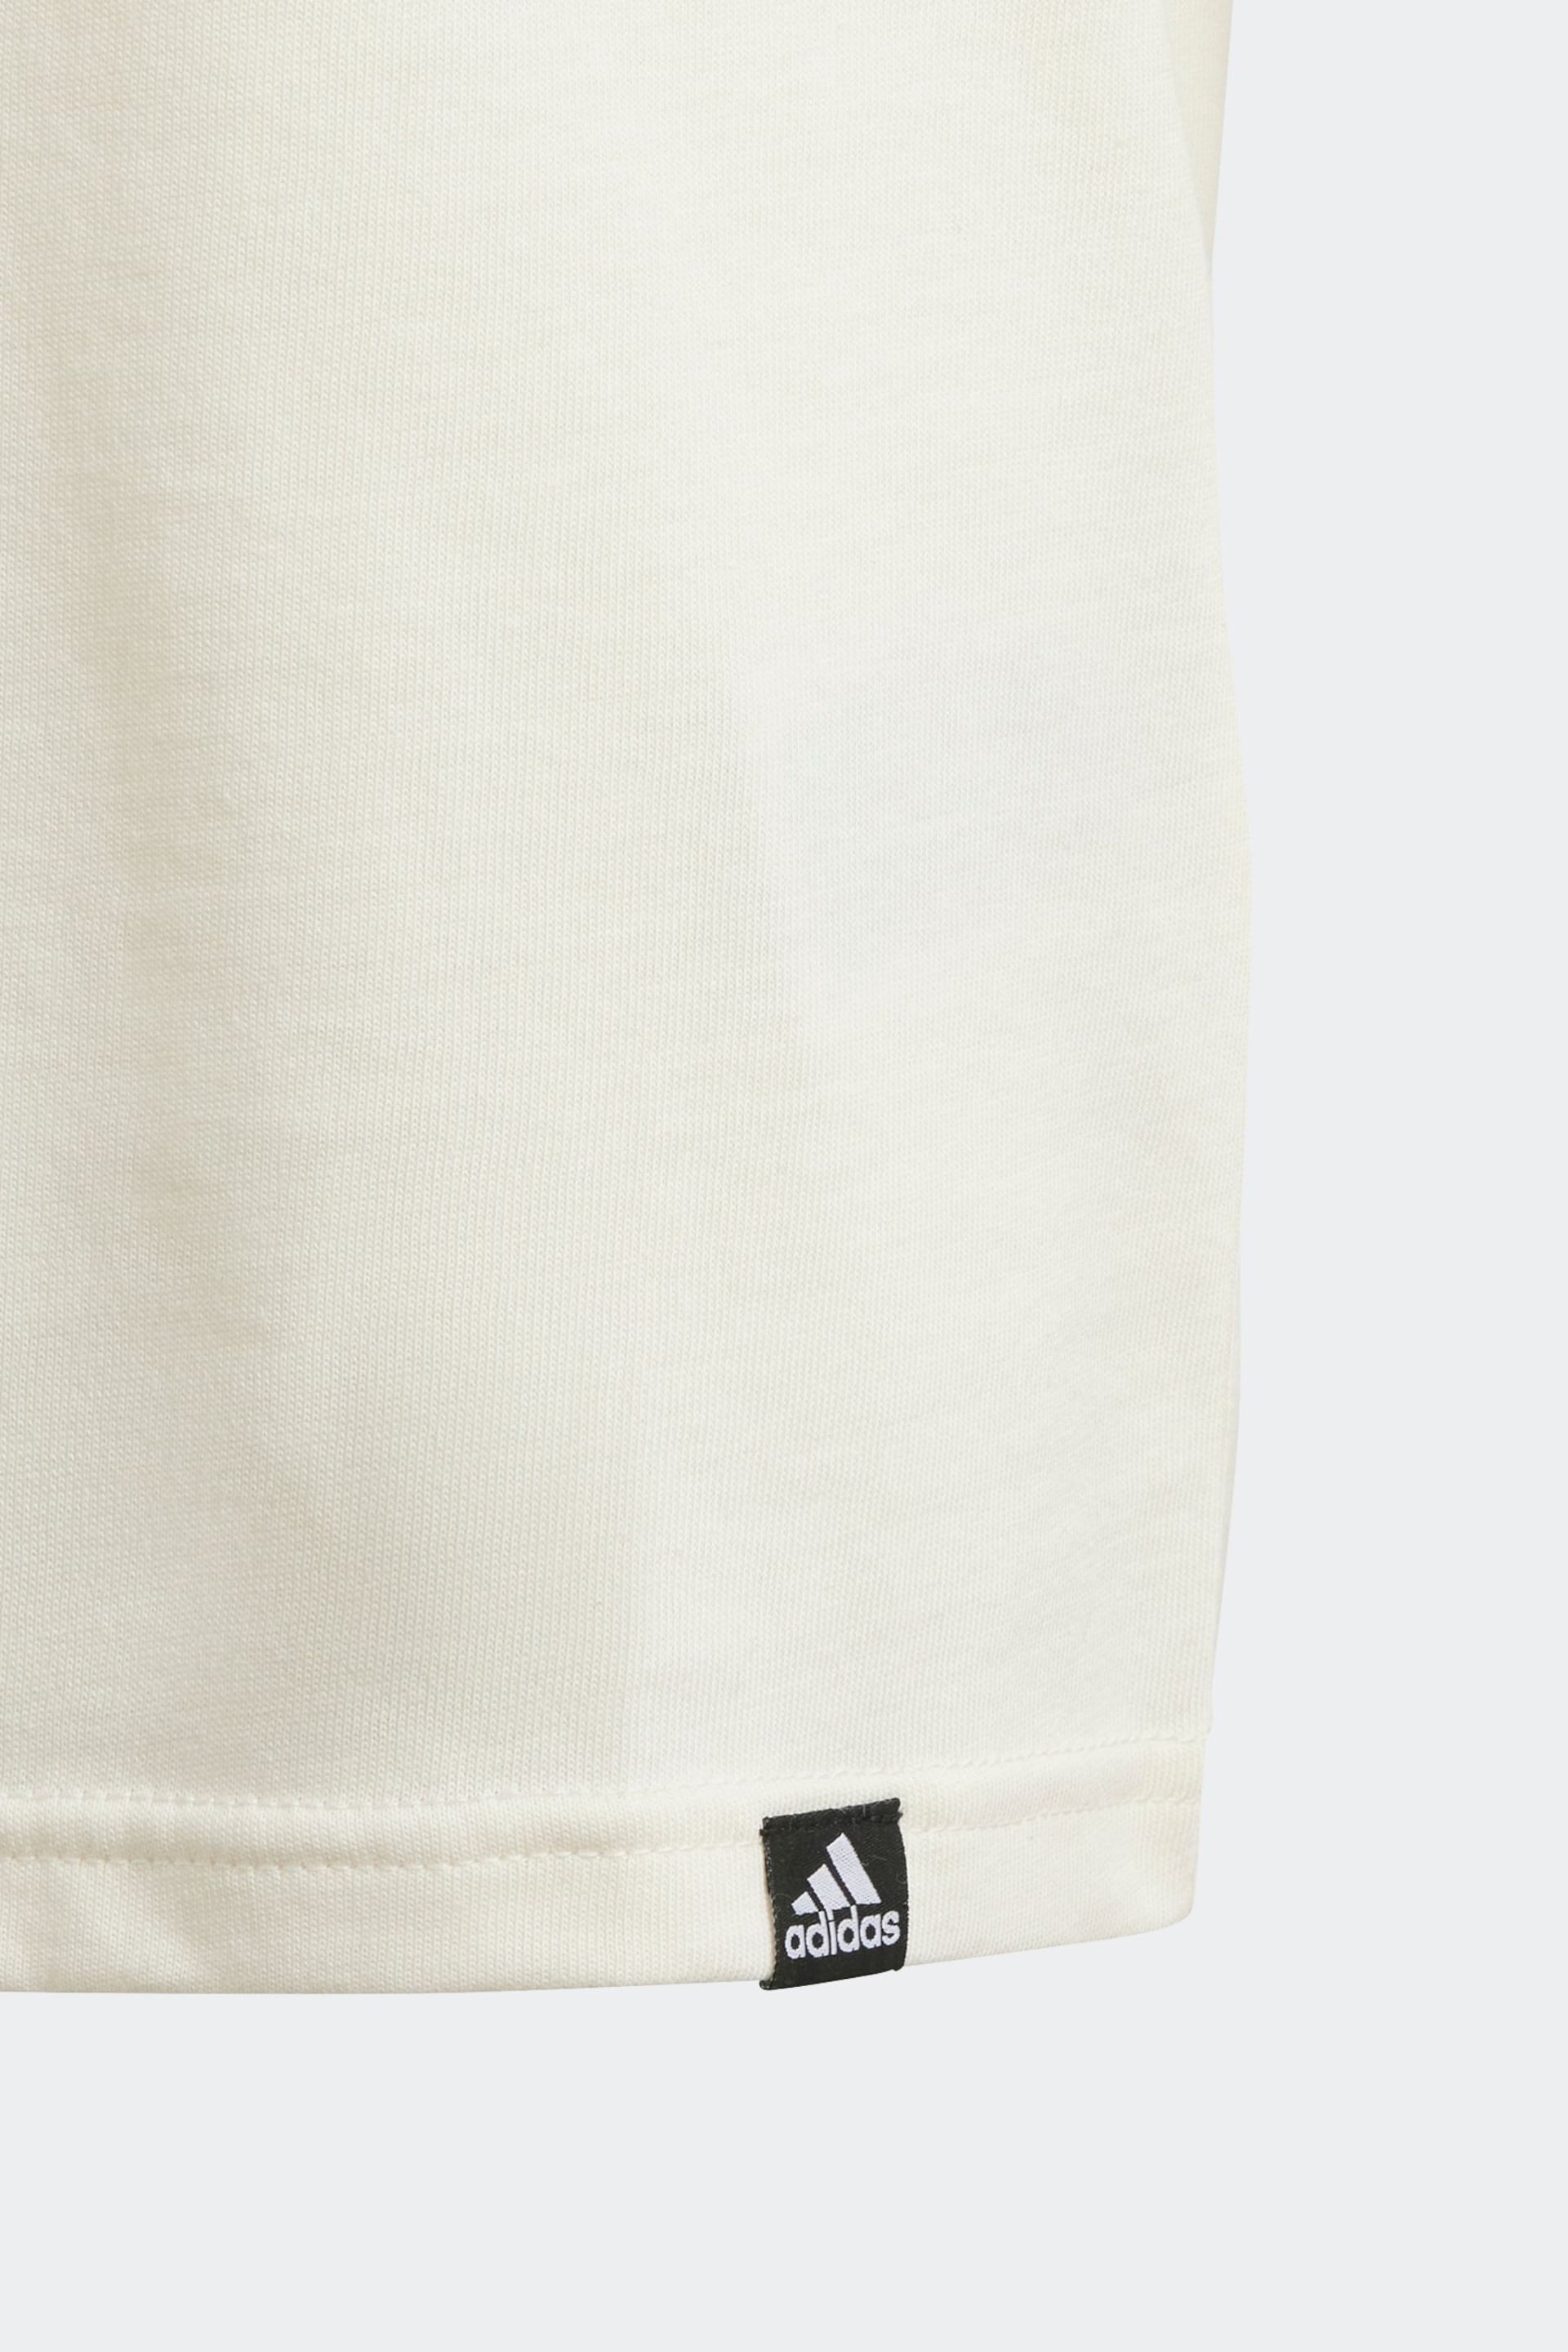 adidas White Sportswear Table Illustrated Graphic T-Shirt - Image 5 of 5